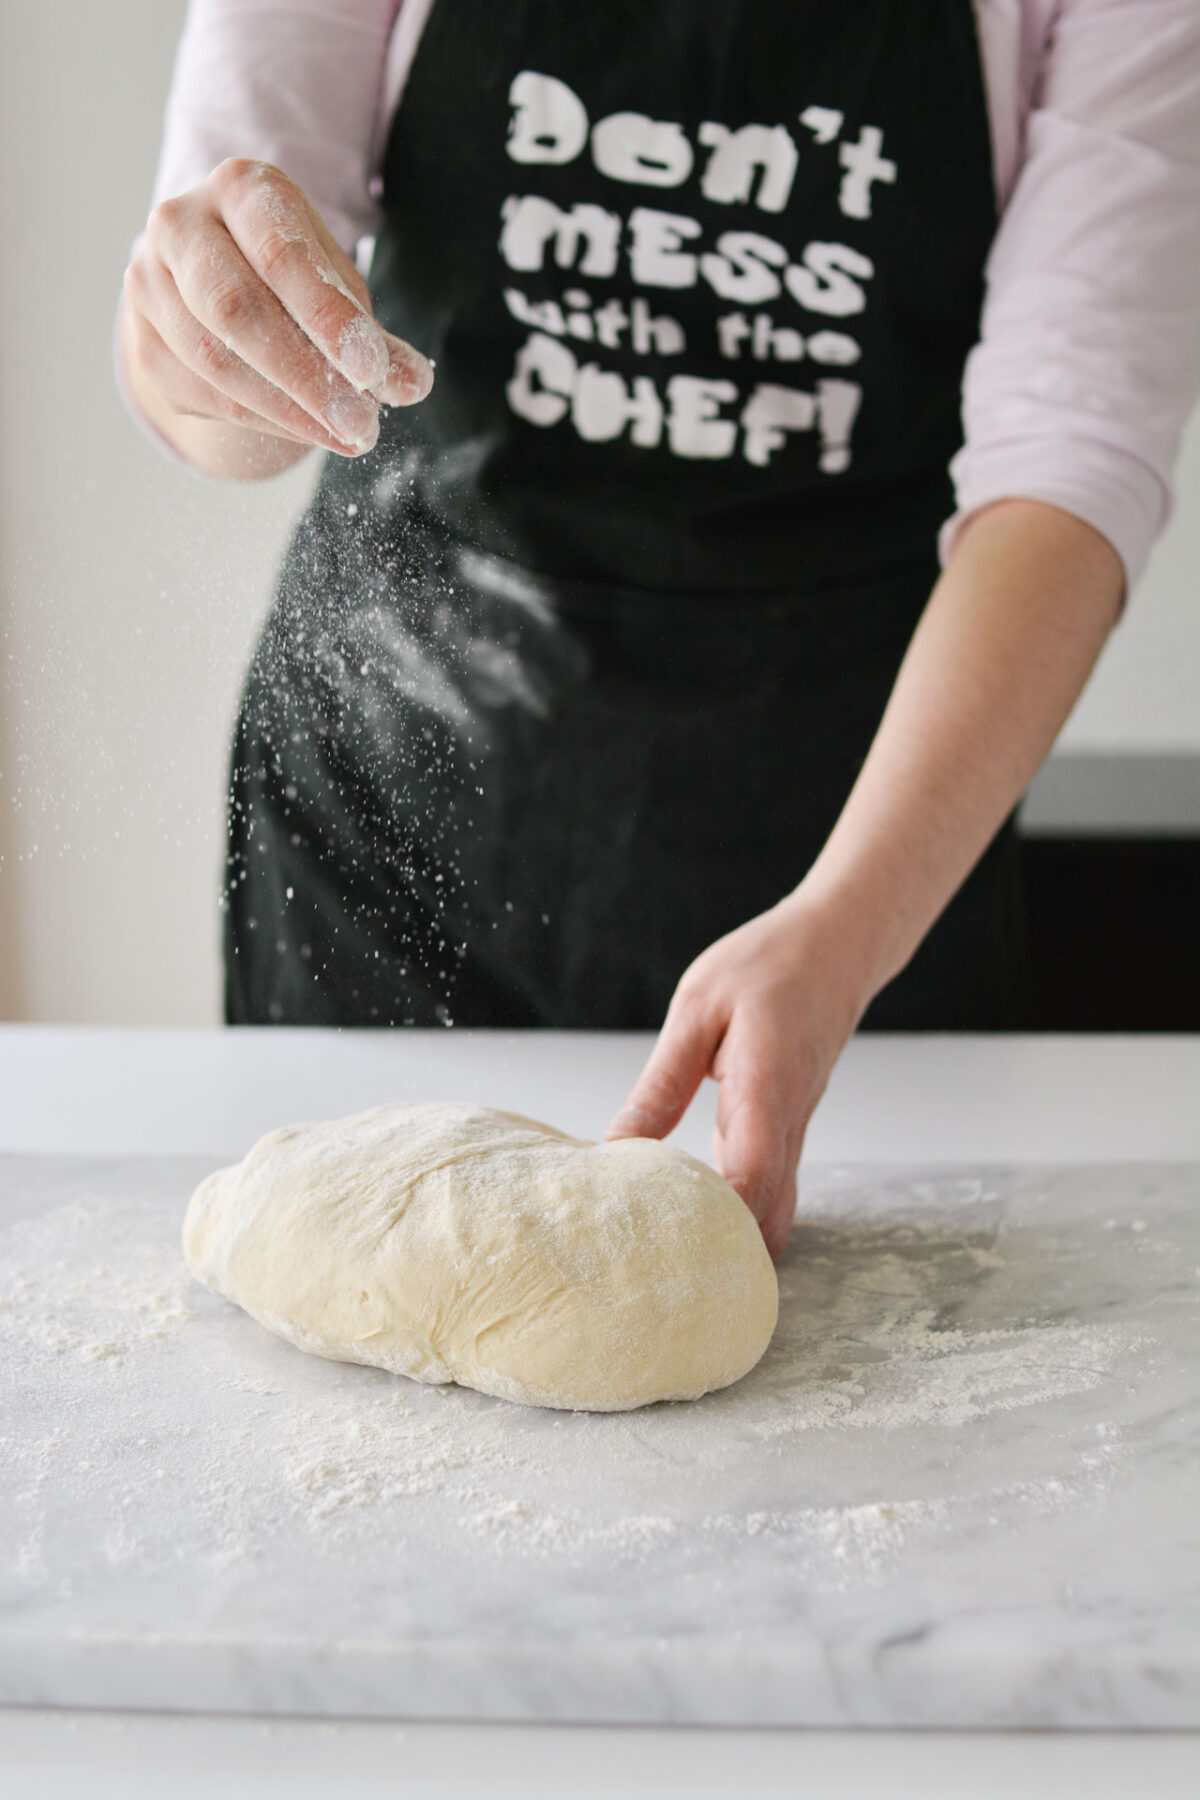 A woman spreading flour onto a kneaded dough on a well-floured surface. Her hands are engaged in the process, creating a rustic and tactile scene of dough preparation.